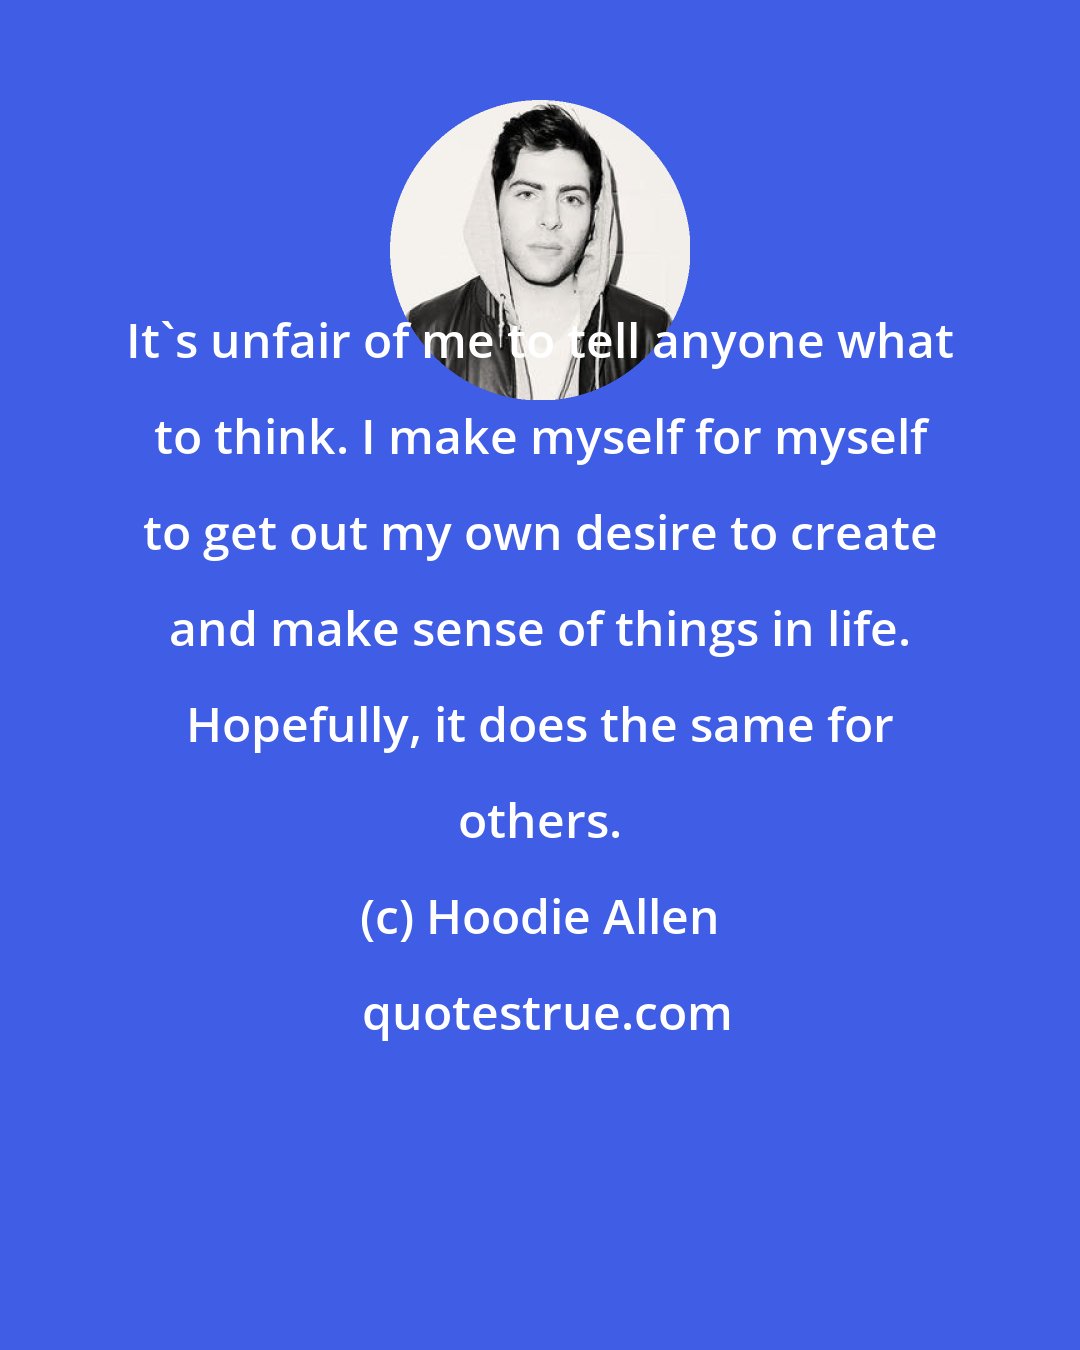 Hoodie Allen: It's unfair of me to tell anyone what to think. I make myself for myself to get out my own desire to create and make sense of things in life. Hopefully, it does the same for others.